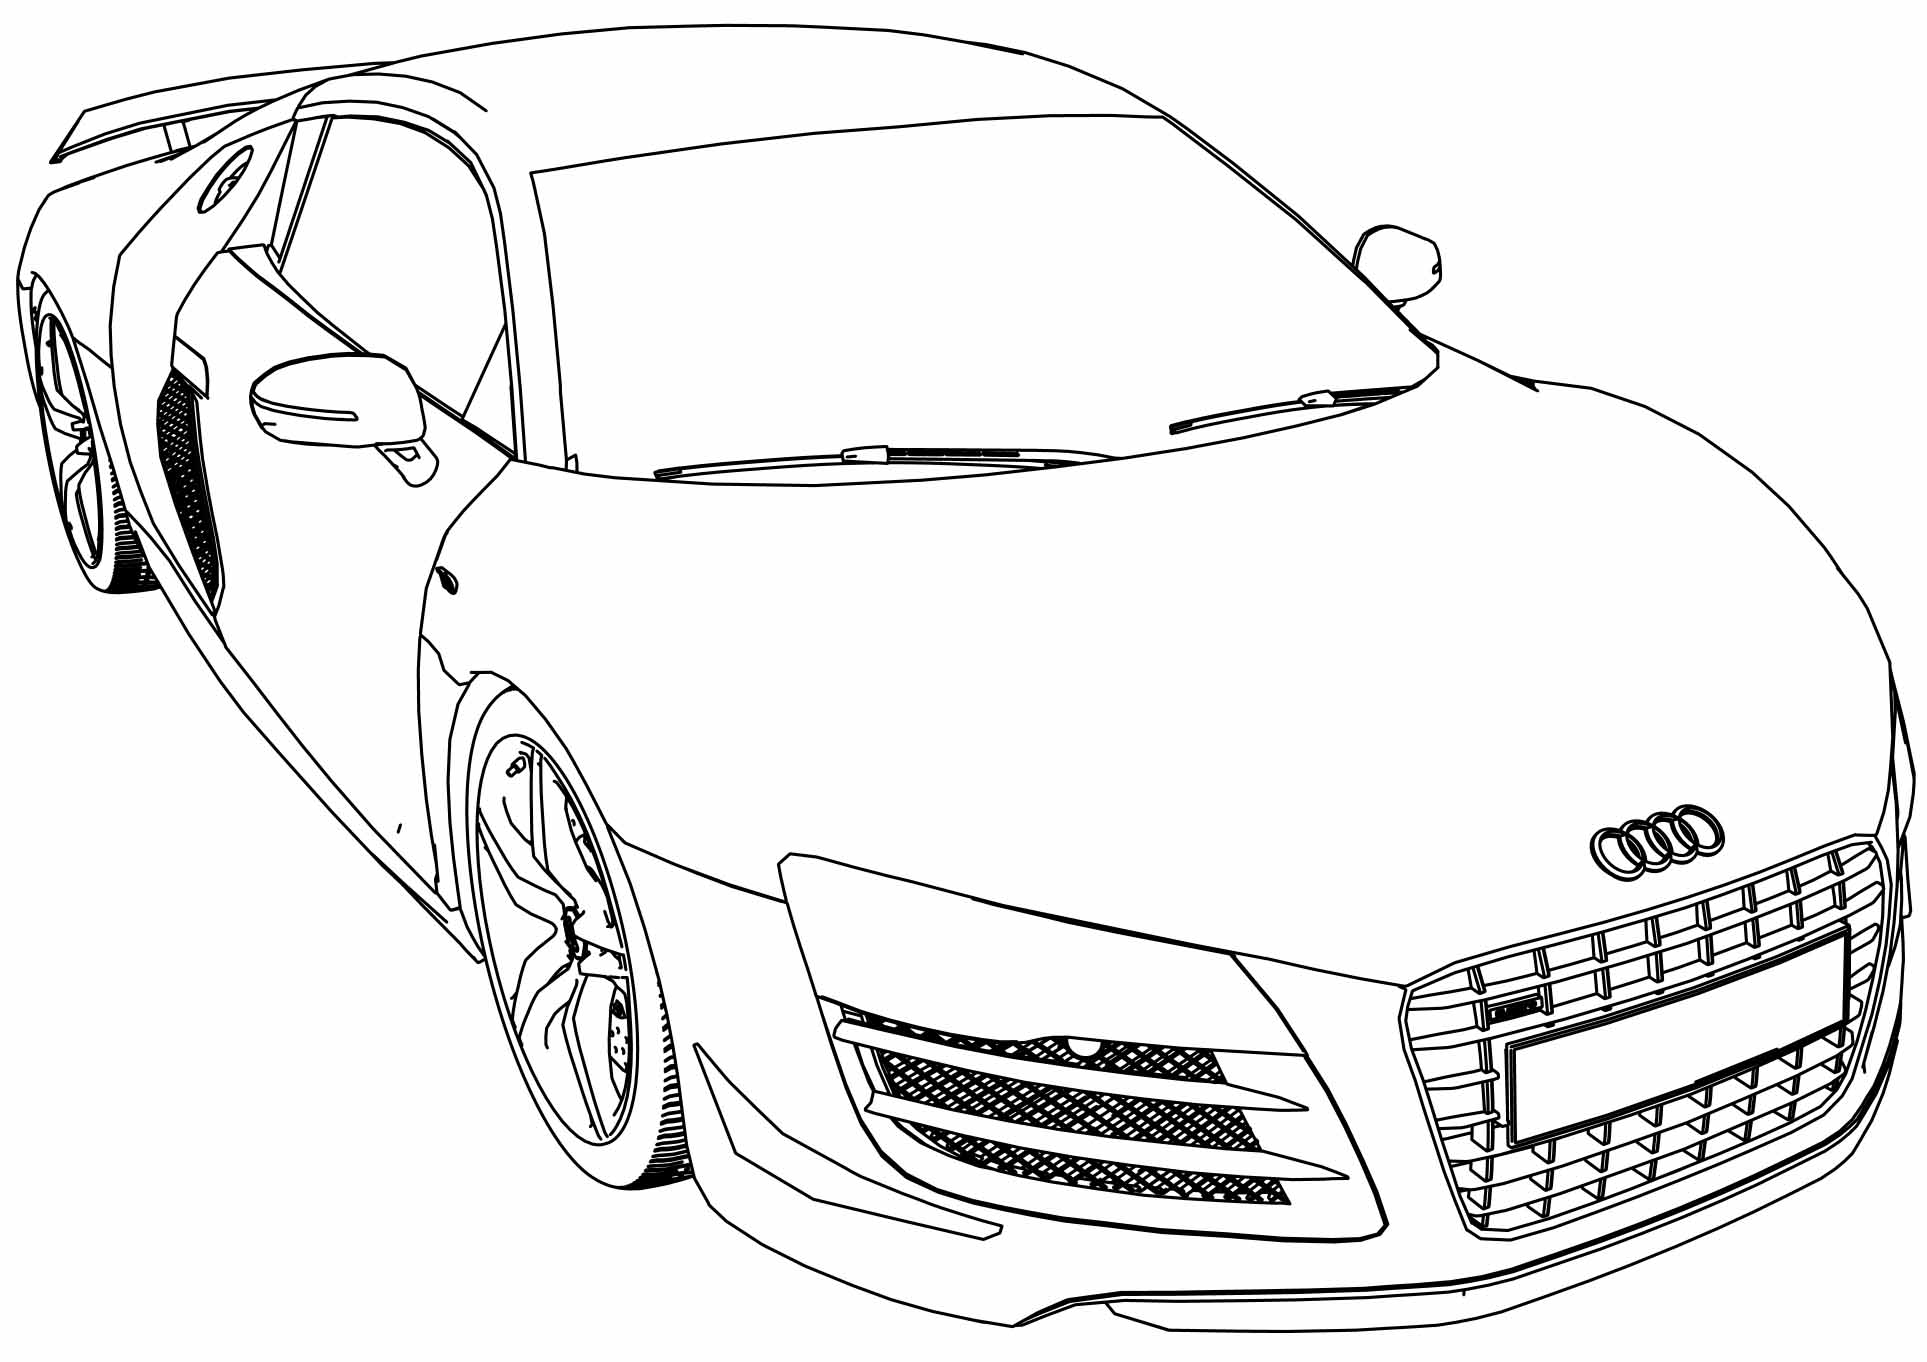 Printable Audi RS Coloring Page for kids.